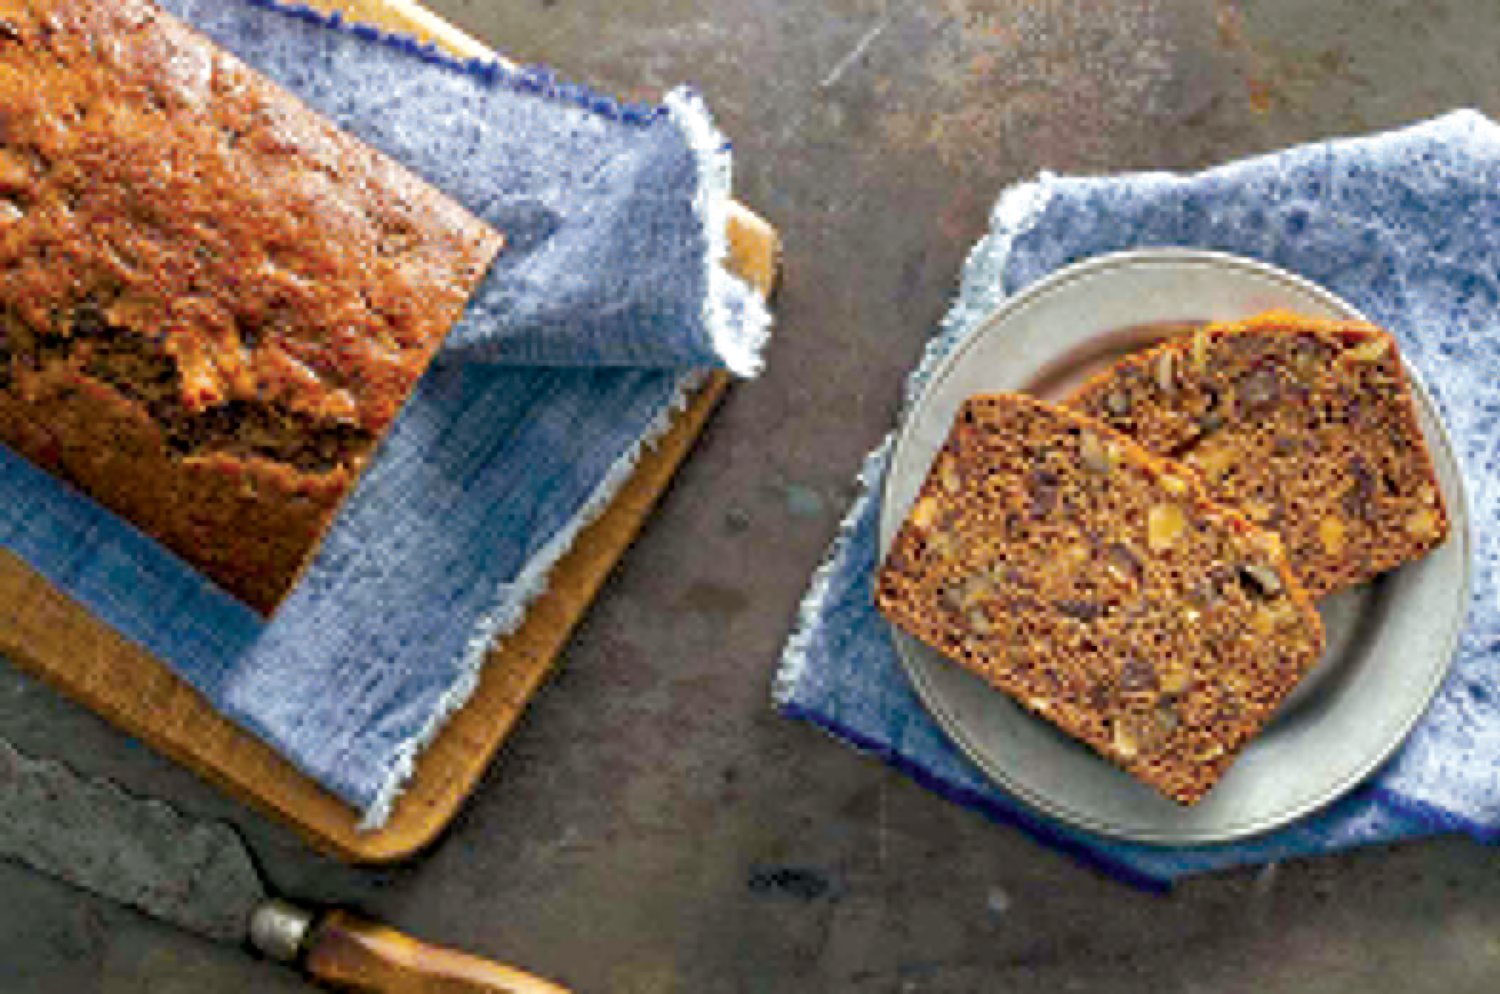 Quick breads are easy to make any time of year. This recipe features chopped dates, nuts and coffee.